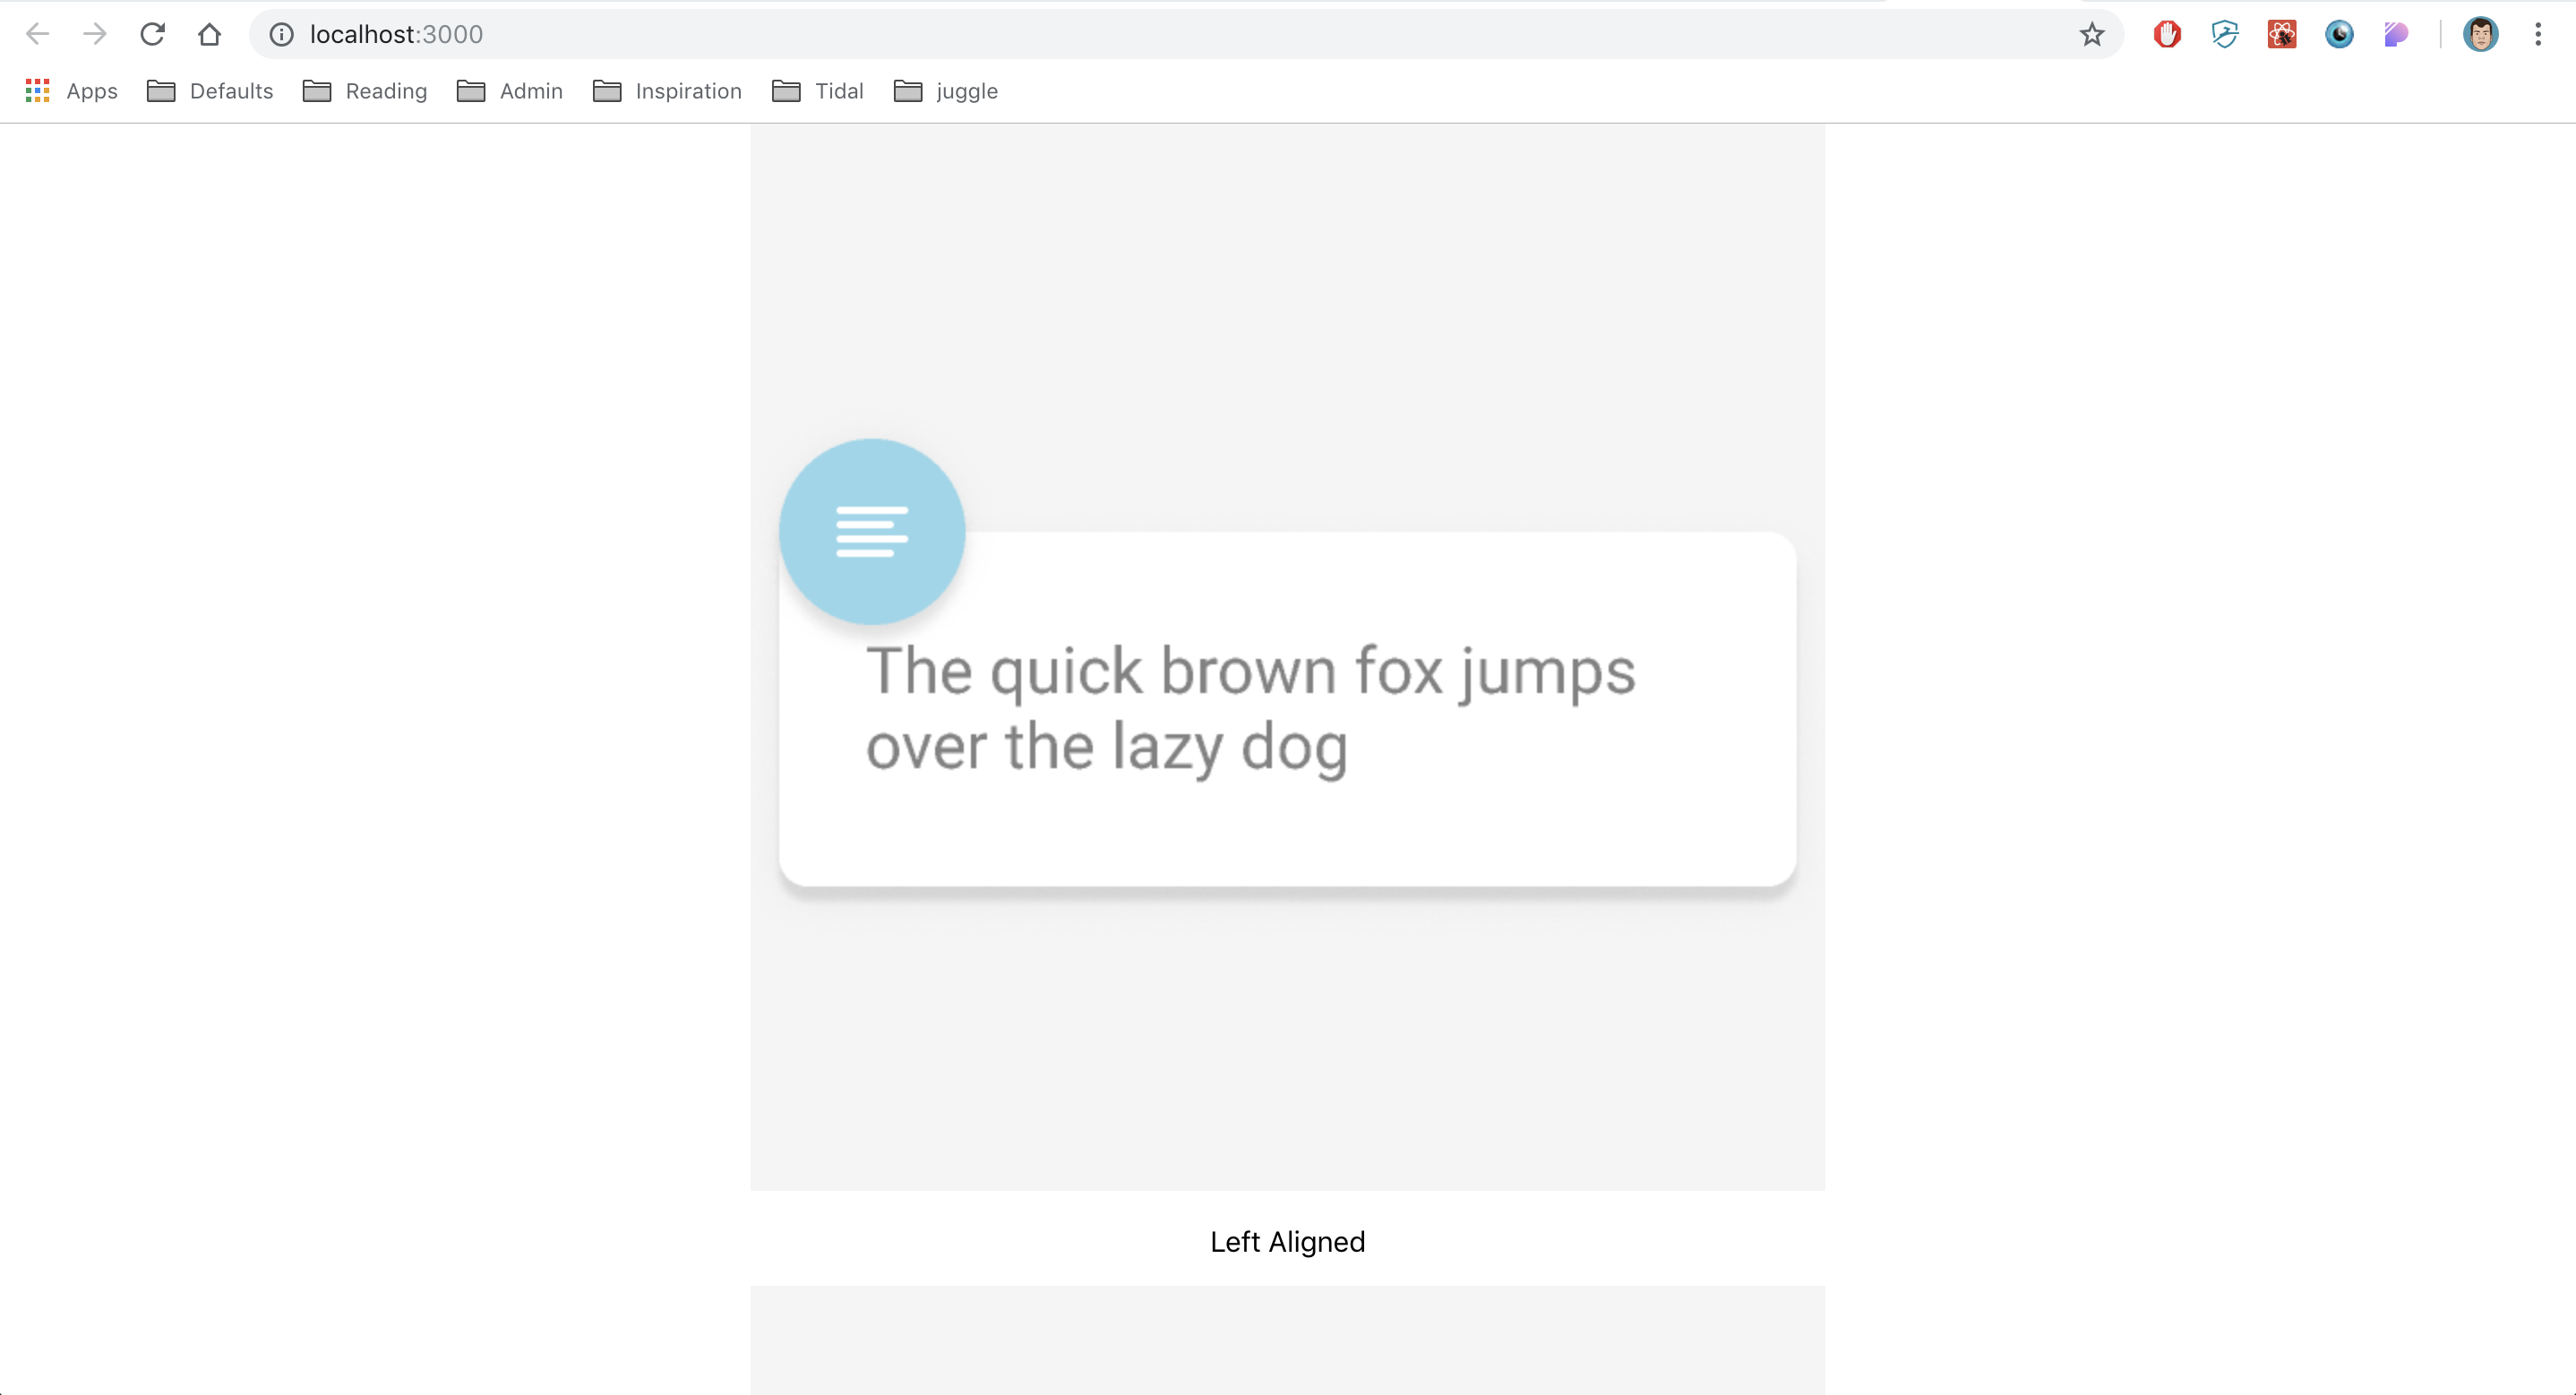 A screenshot of a browser window displaying an image from Figma